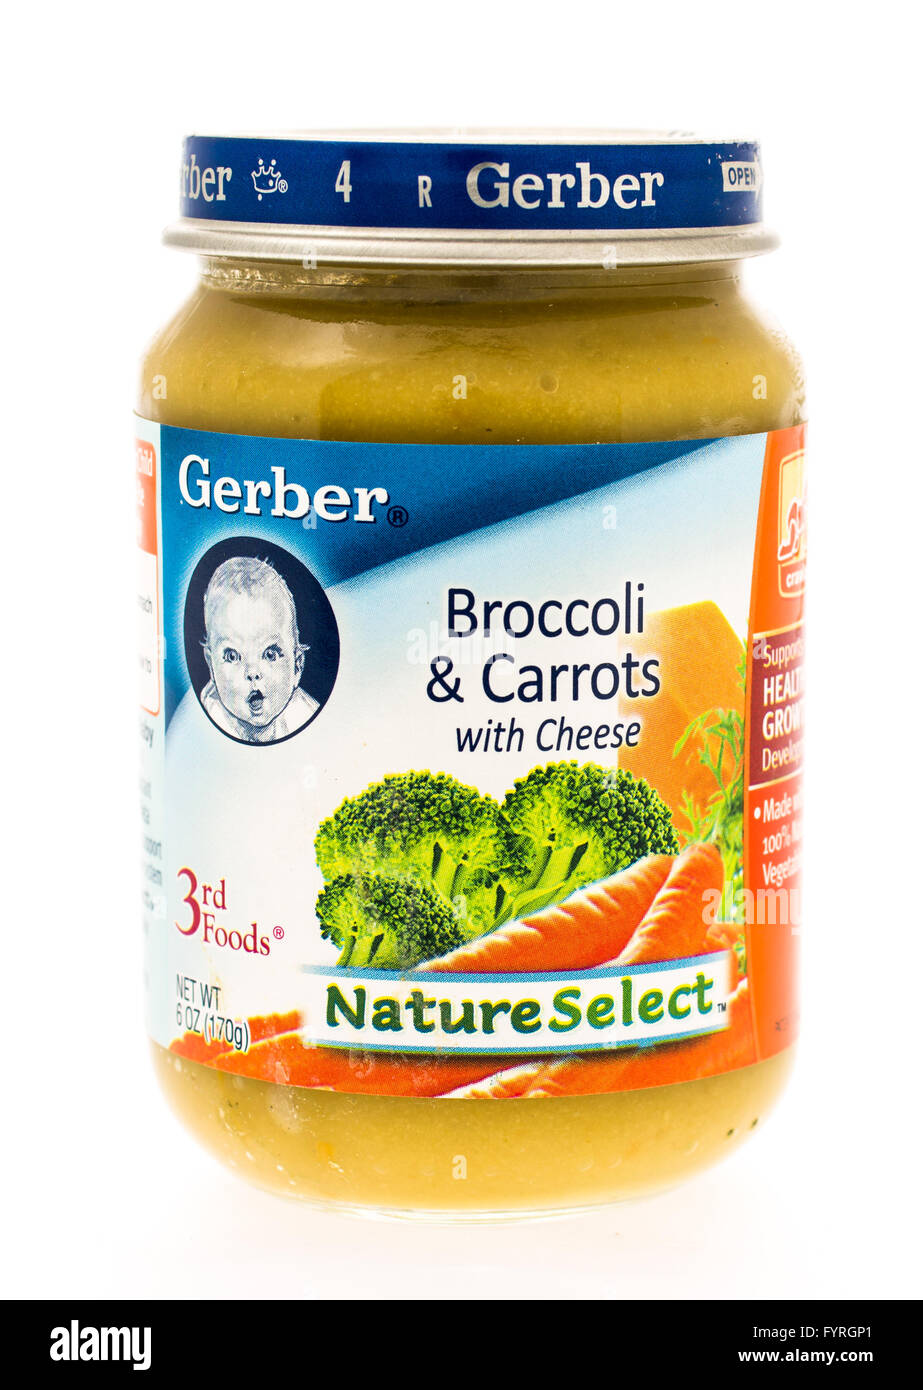 Gerber baby food jar with broccoli and cheese flavor